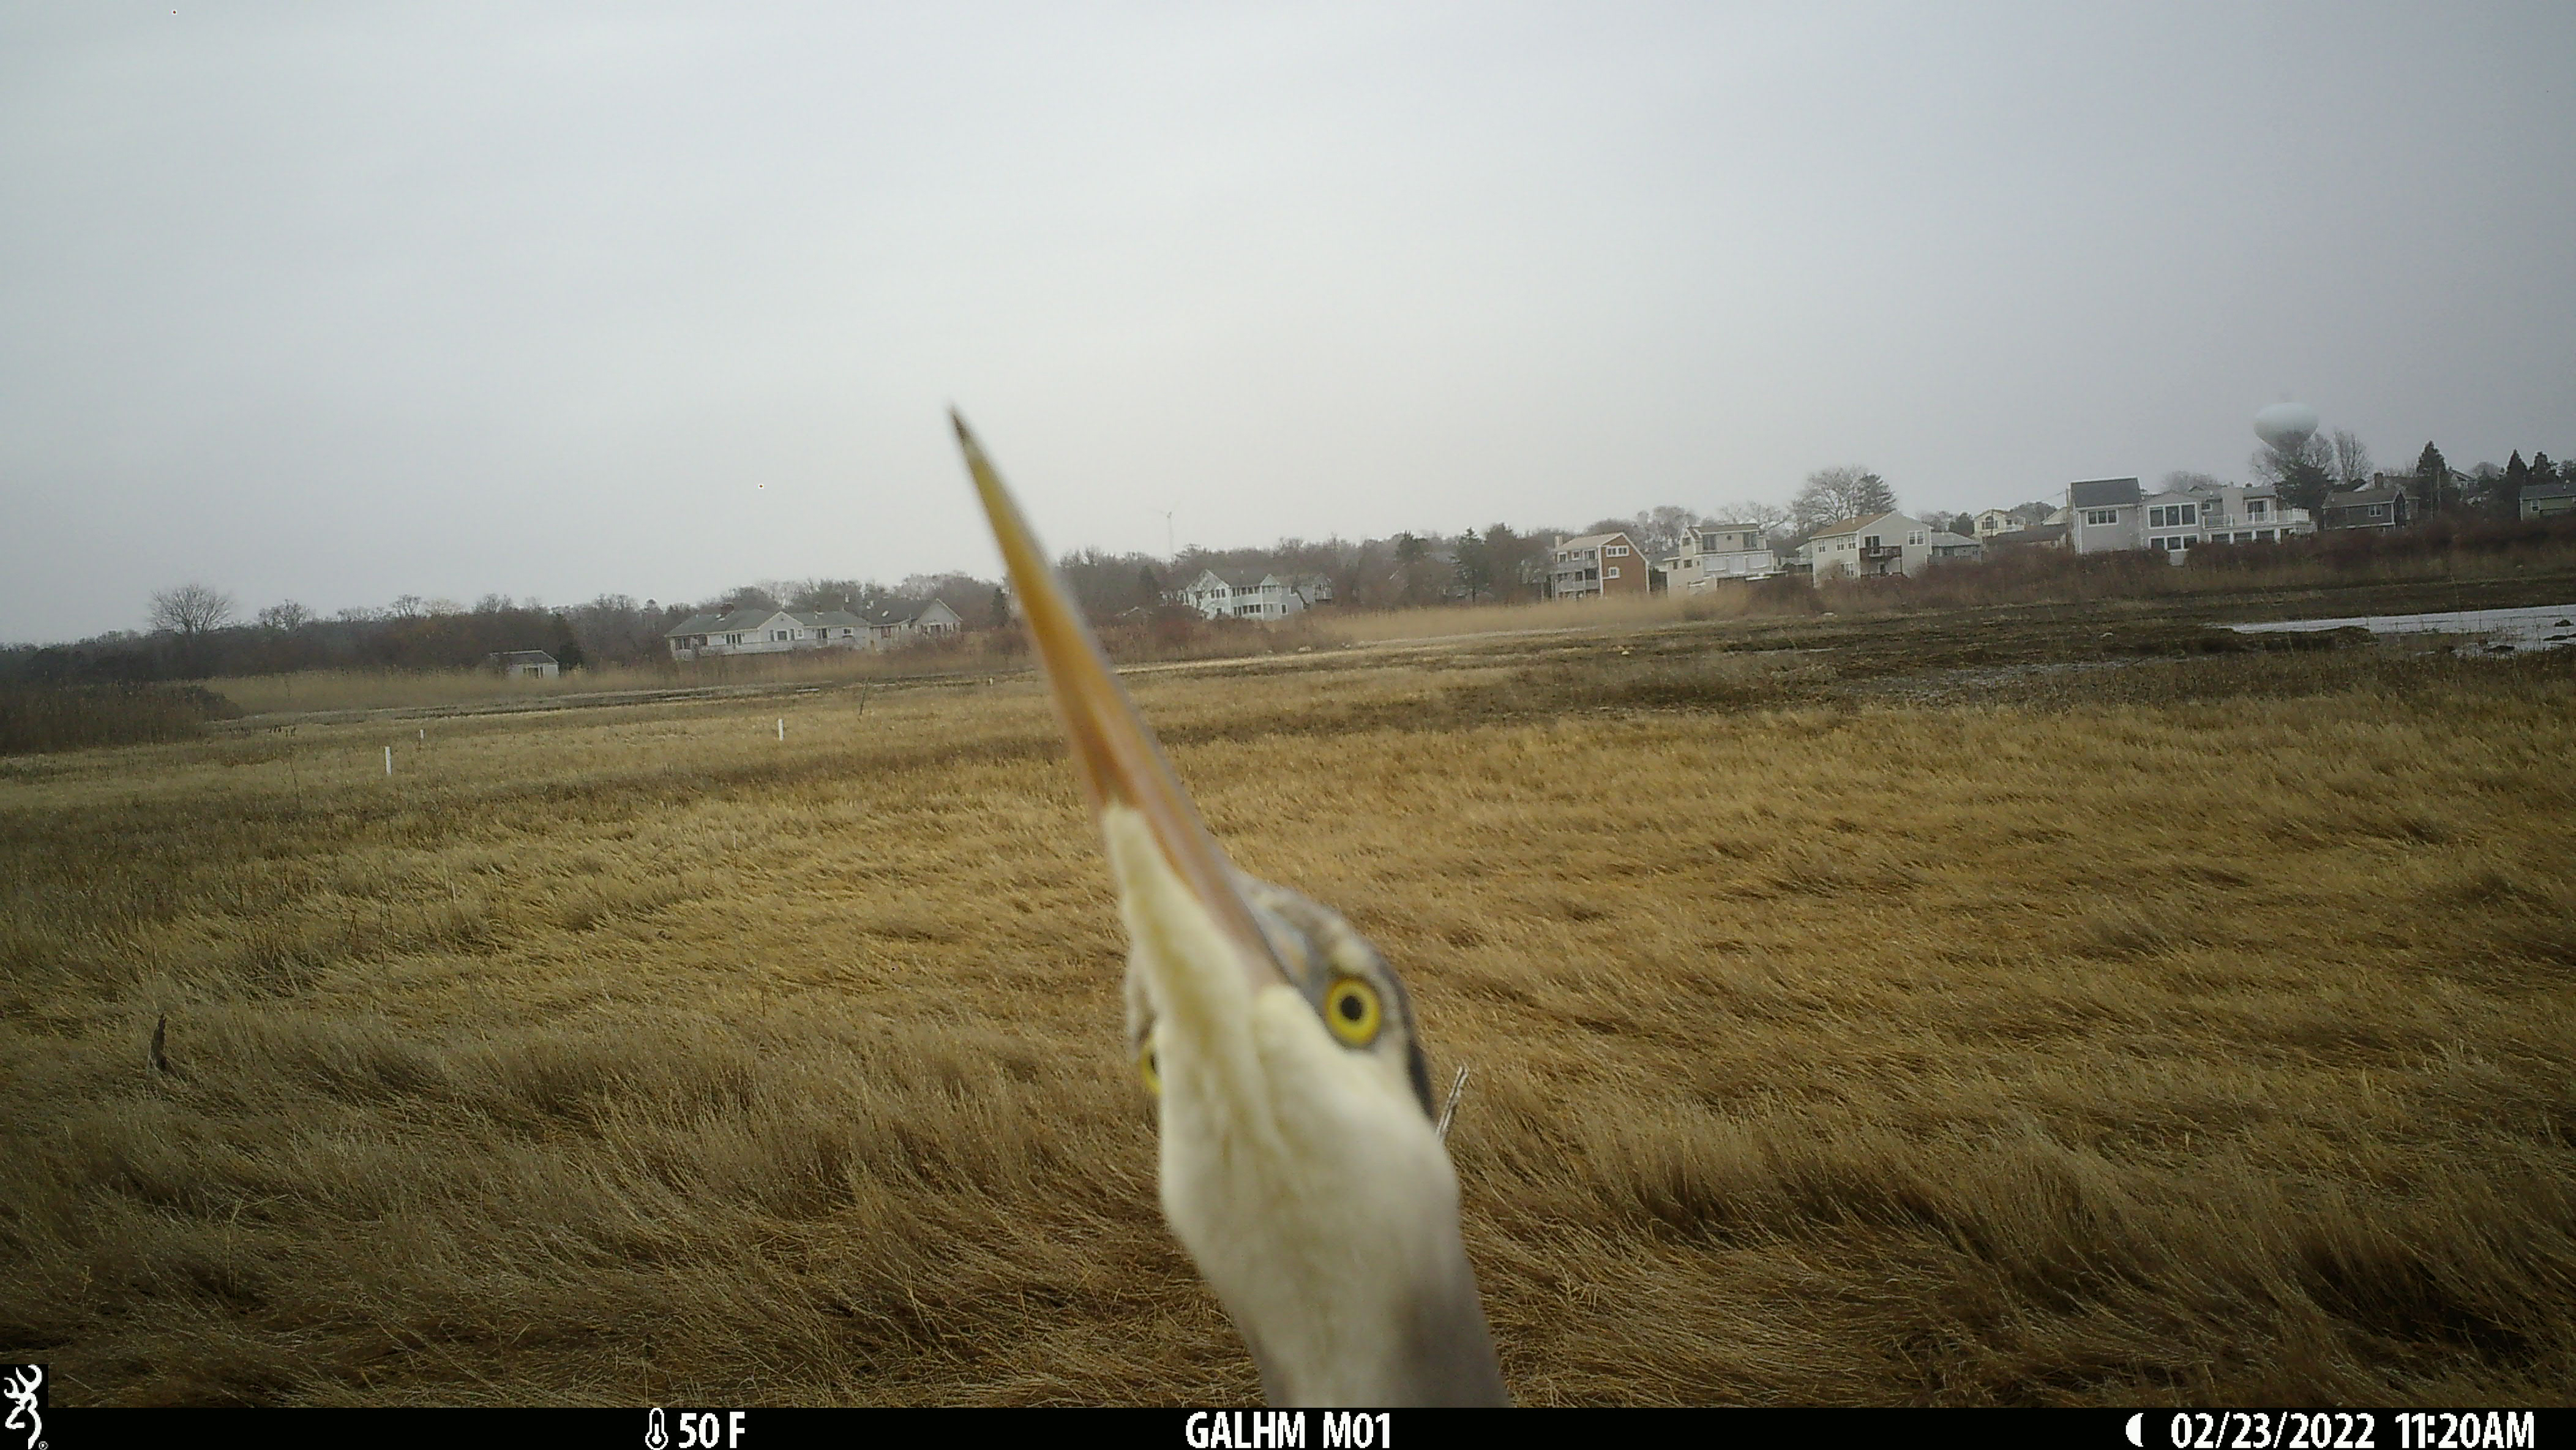 A heron points its beak in the air very close to the camera in front of grassy wetlands